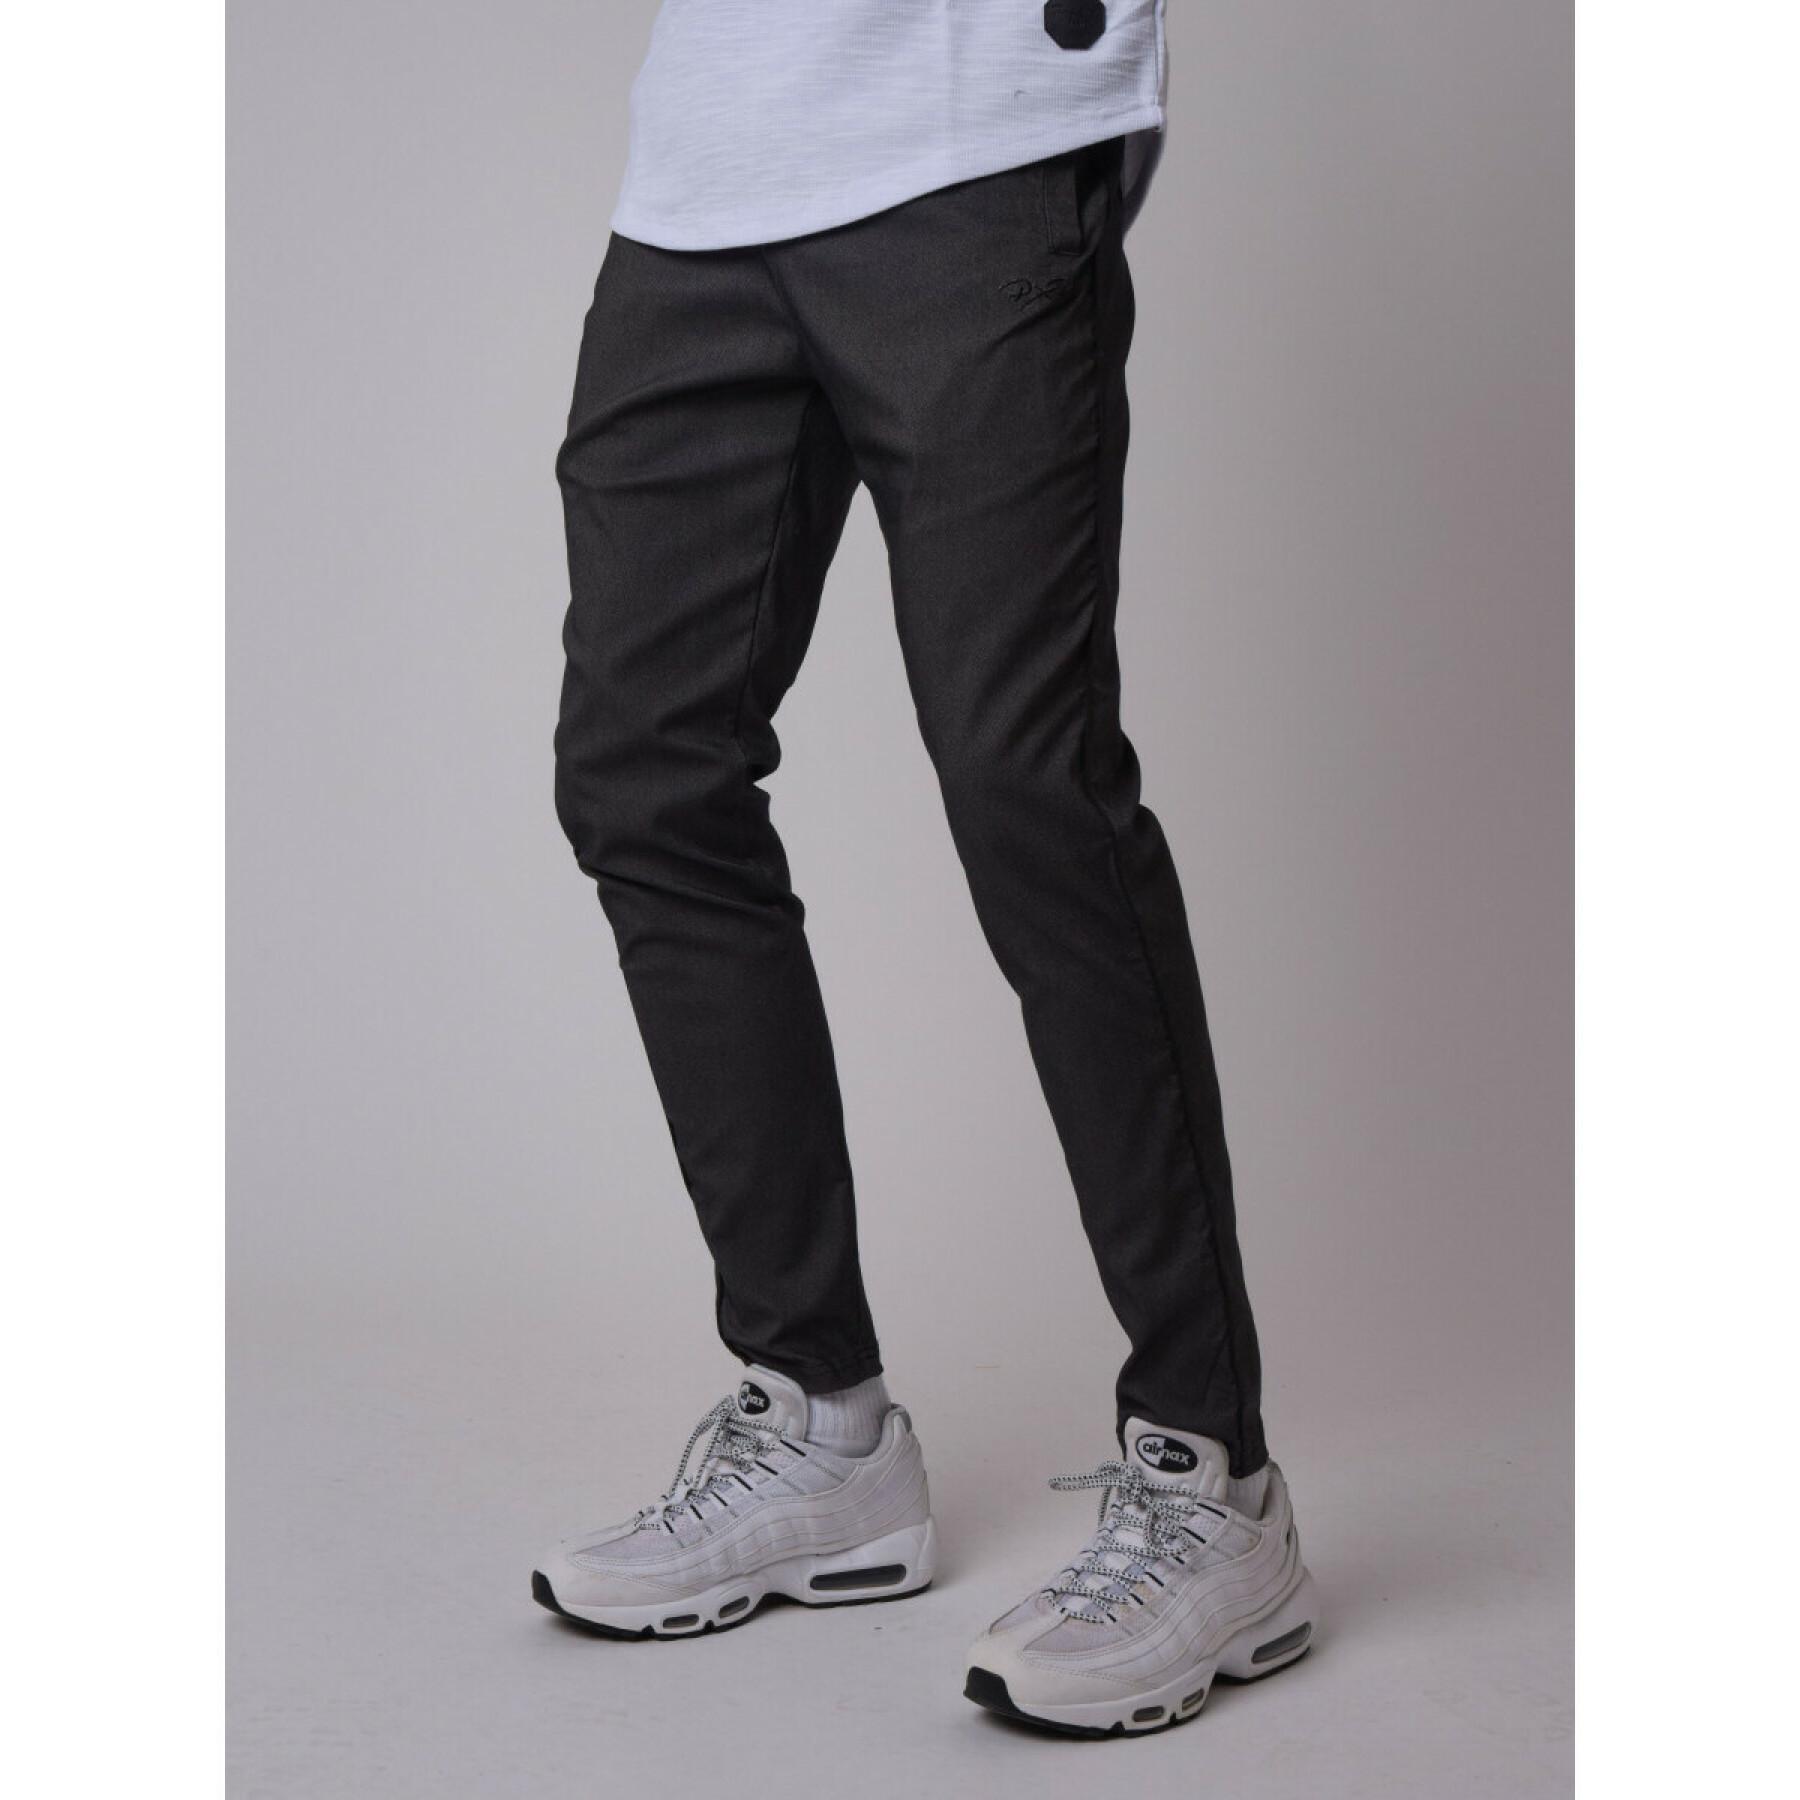 Basic slim-fitting trousers with contrasting pipping on the sides Project X Paris